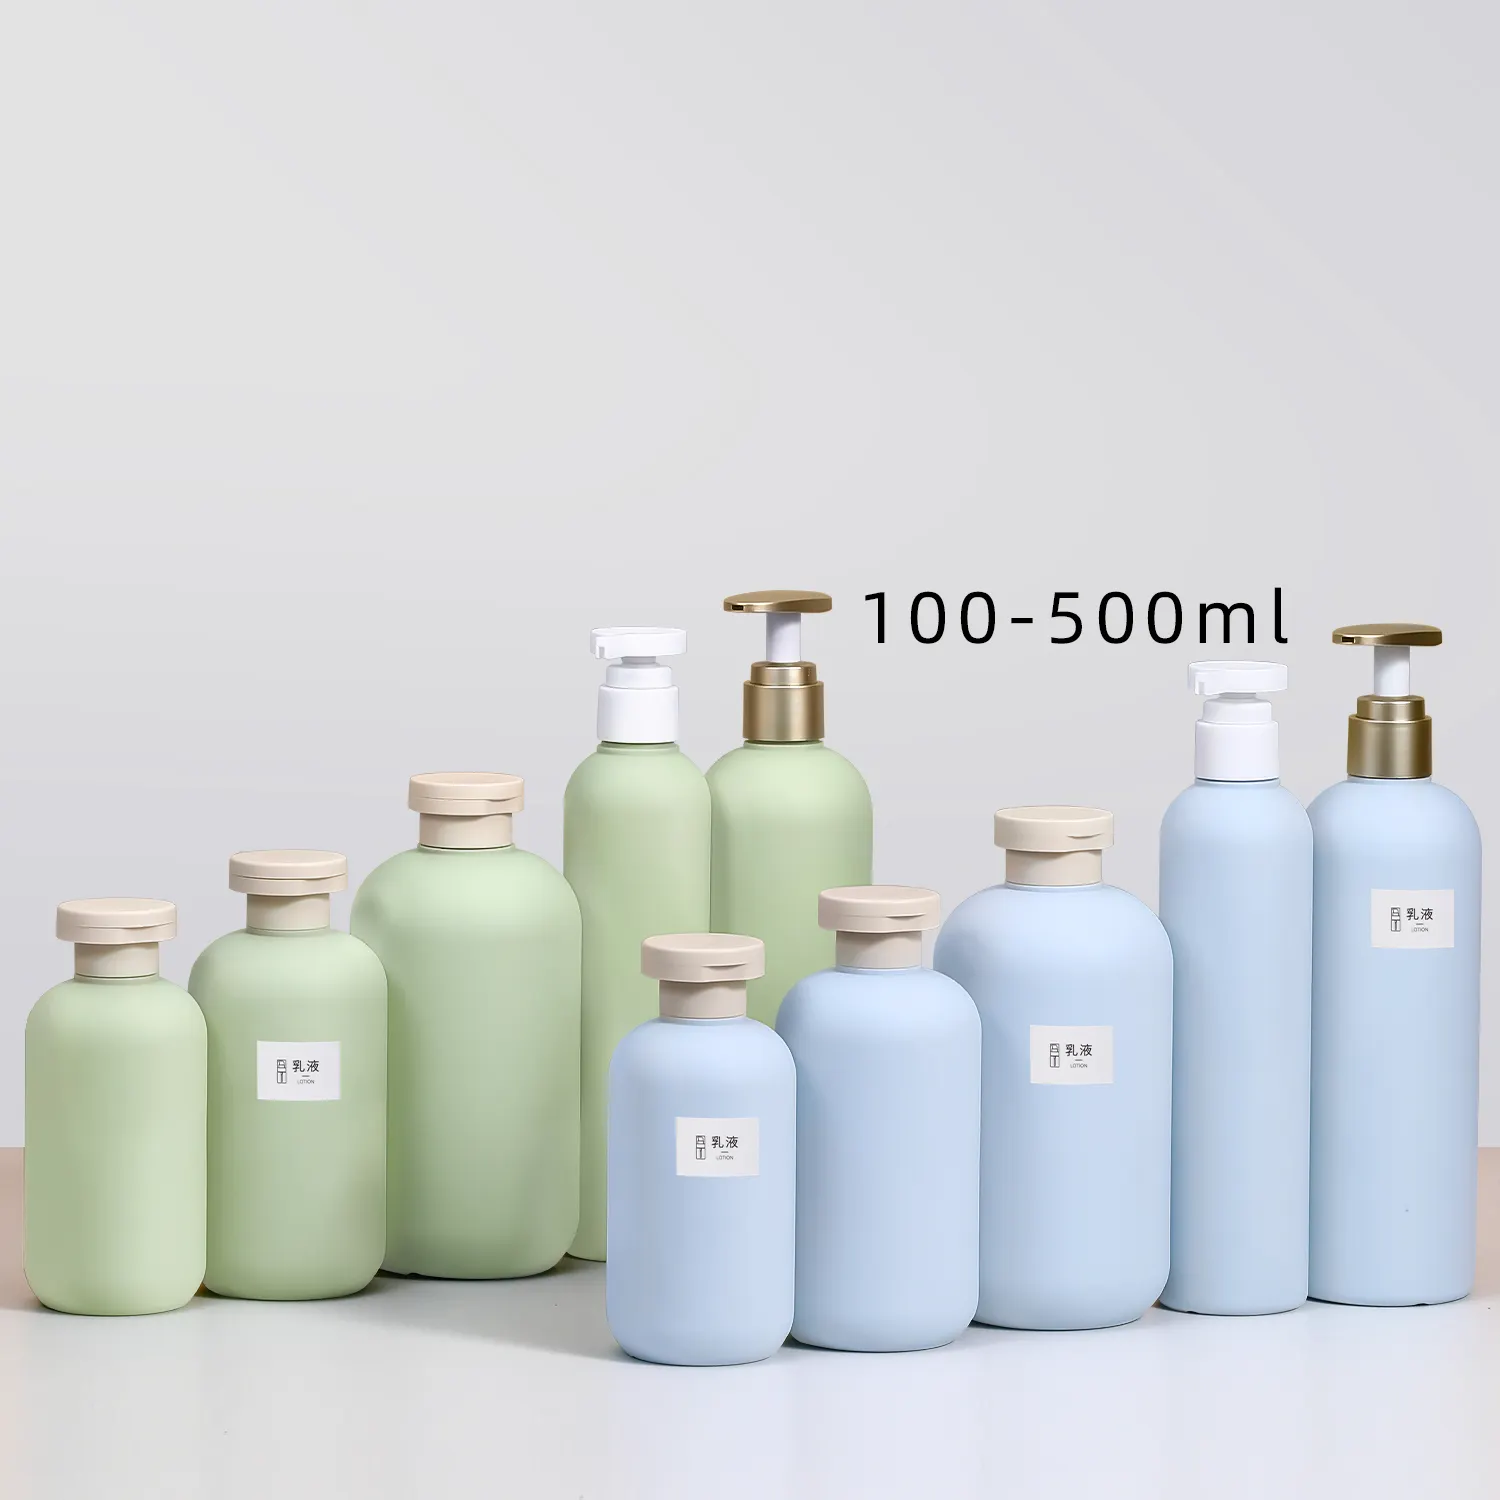 100ml~500ml Luxury Green Round Soft Touch Squeeze Plastic Cosmetic Body Lotion Butter Shampoo Bottle Flip Cap